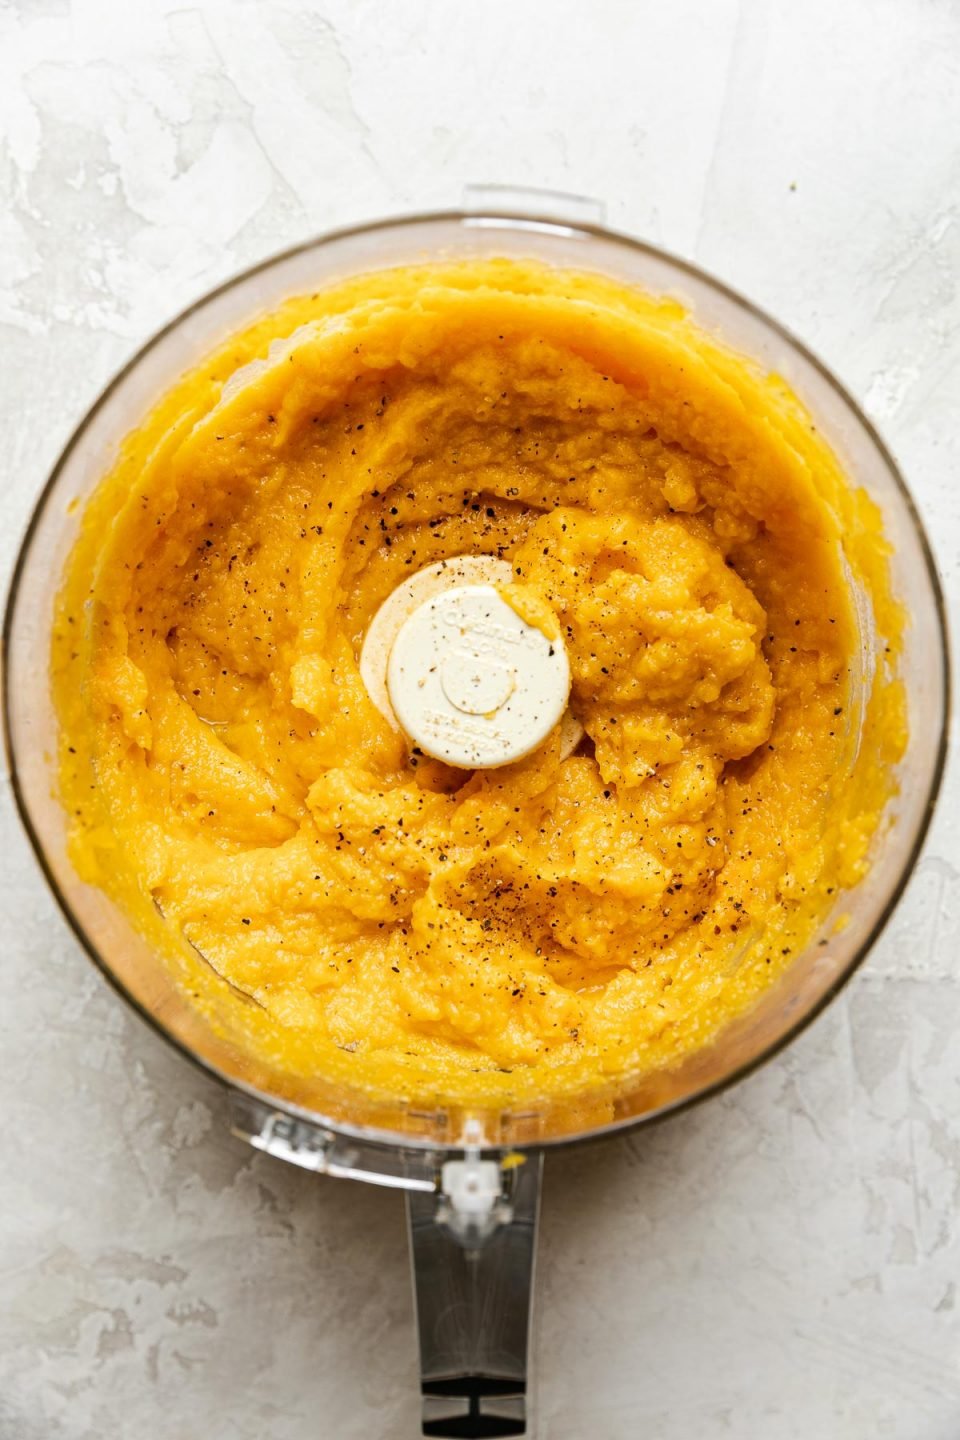 Roasted Garlic whipped Butternut Squash in a food processor bowl. The food processor bowl sits on top of a creamy cement surface.